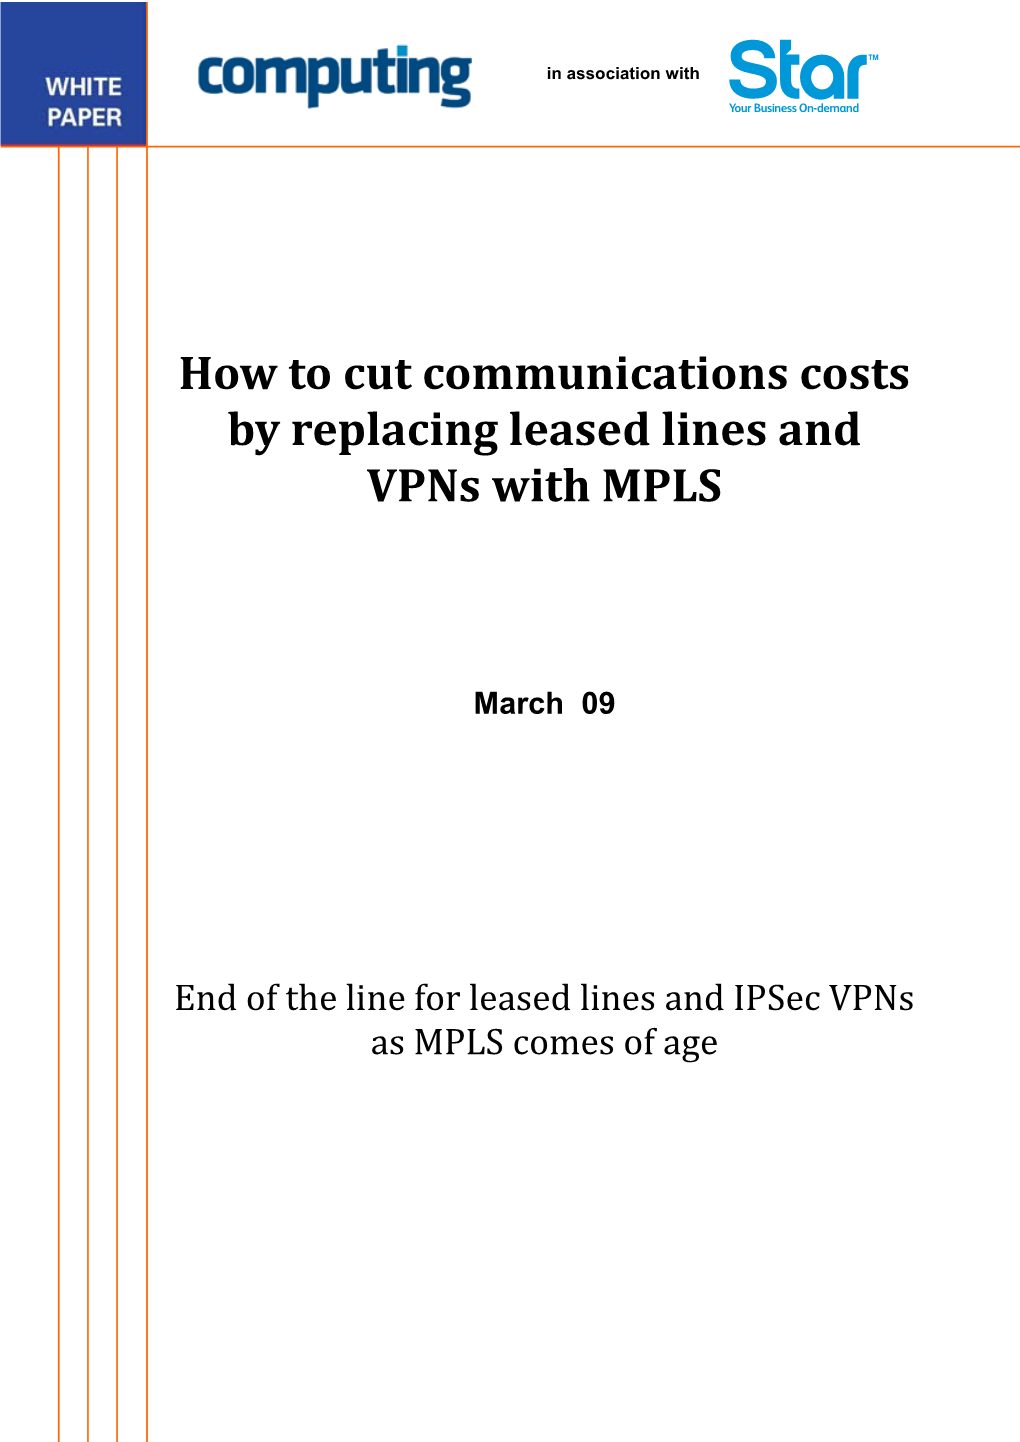 How to Cut Communications Costs by Replacing Leased Lines and Vpns